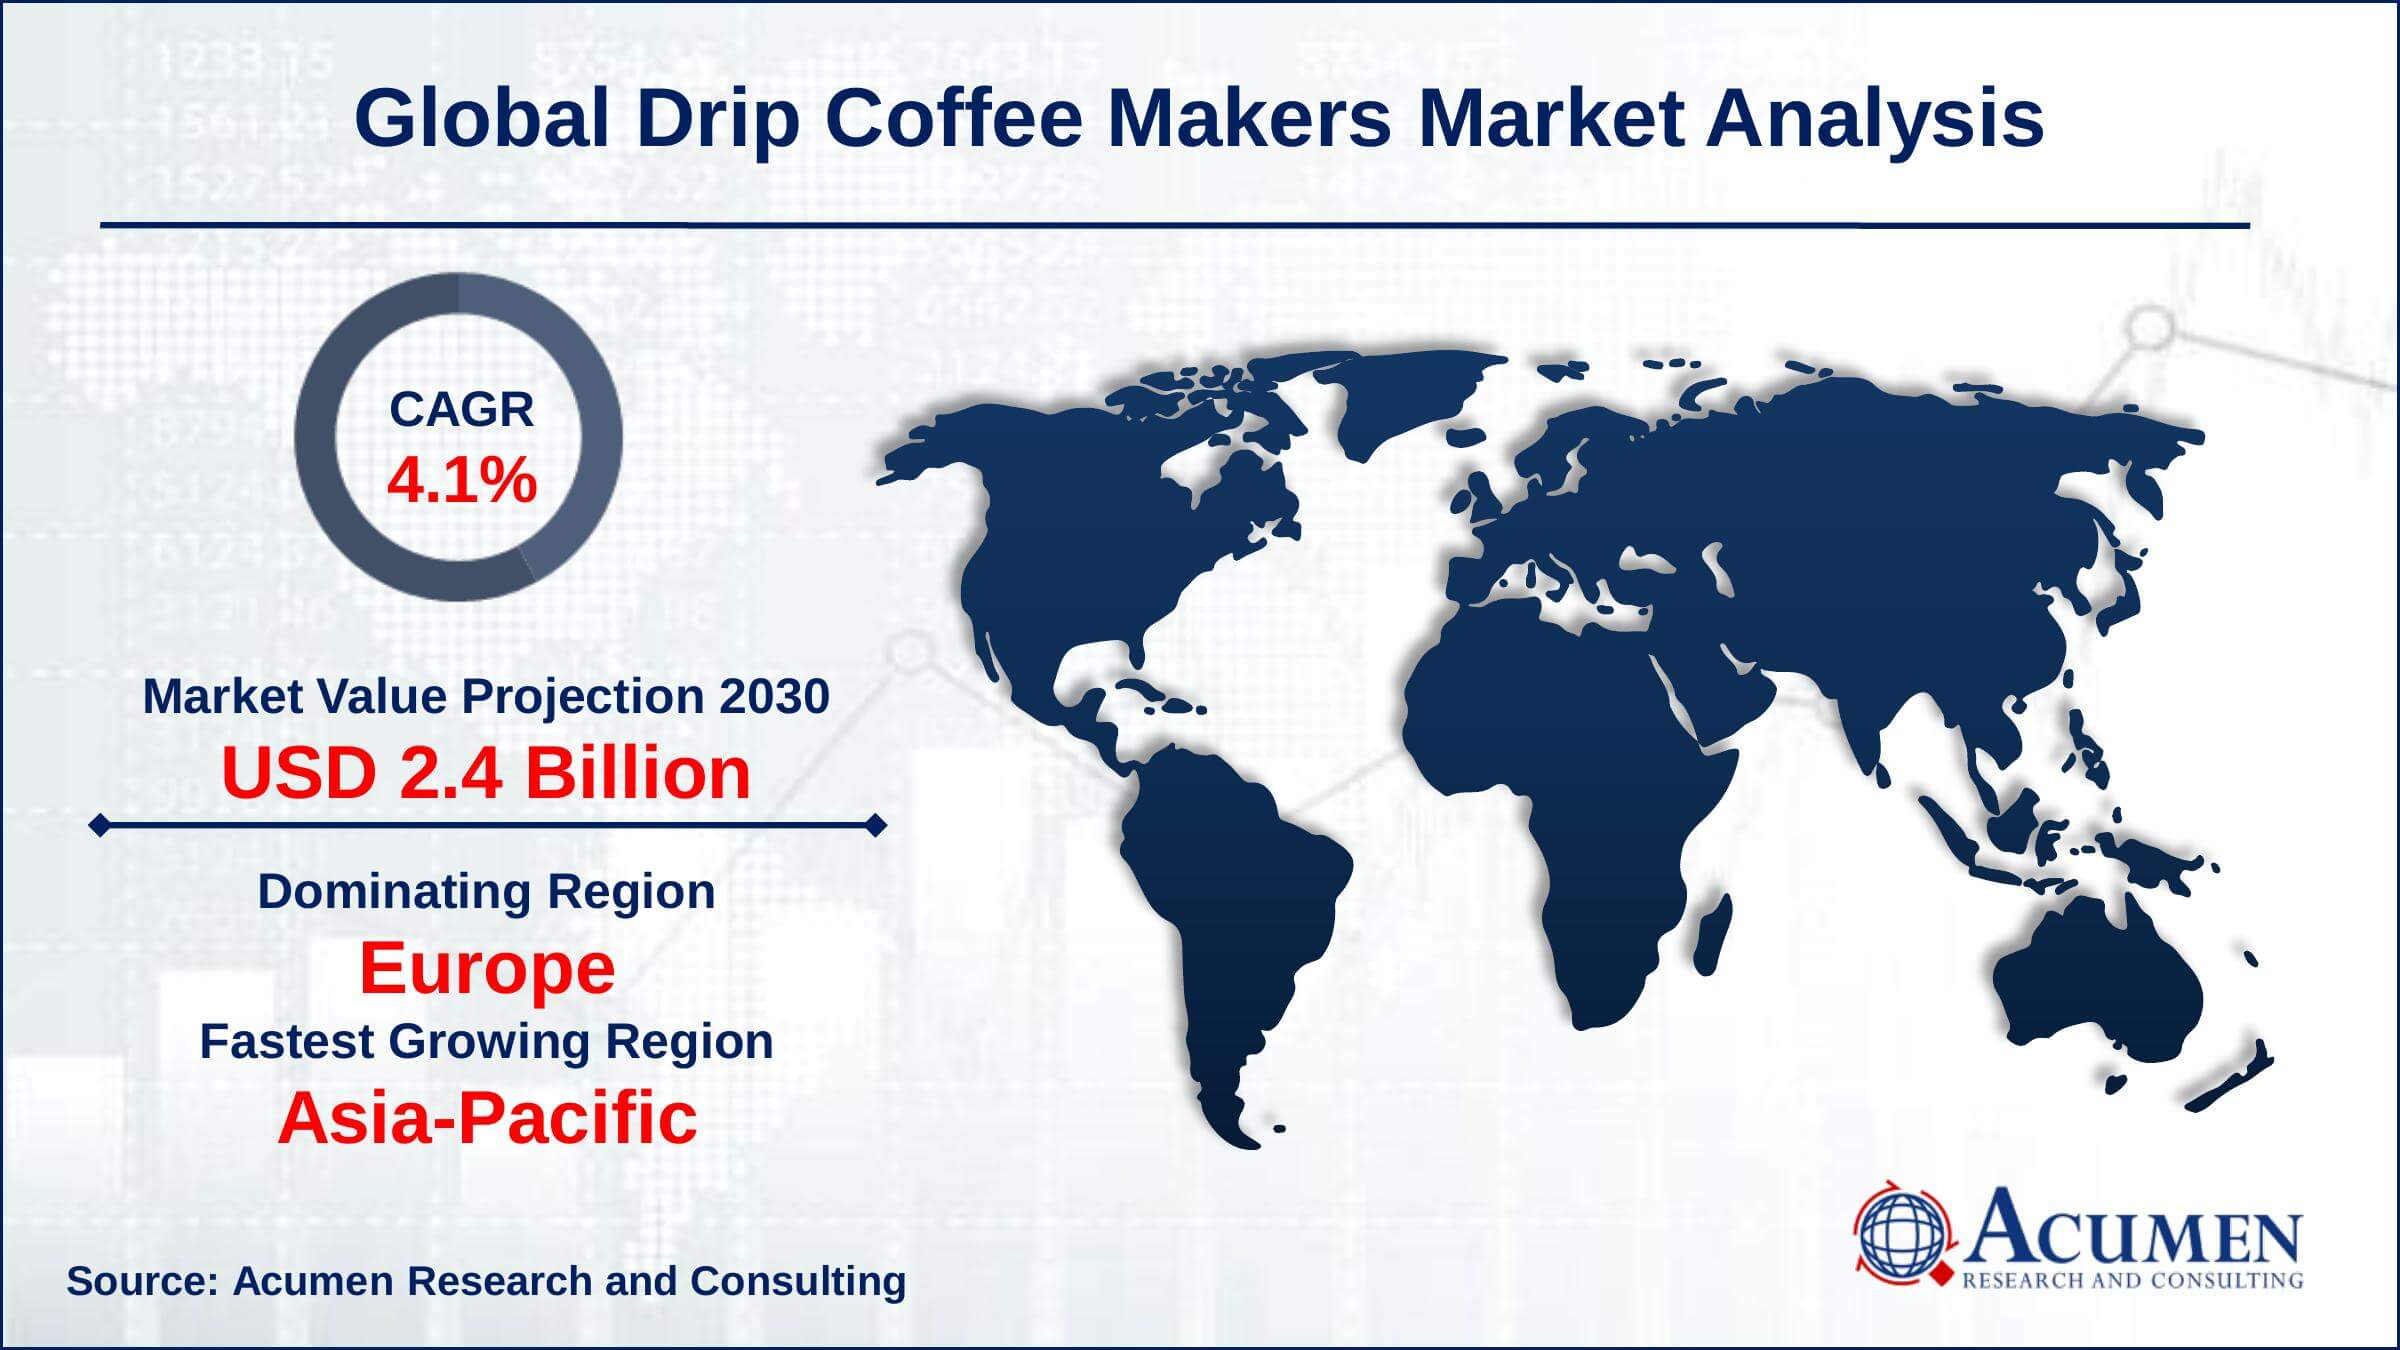 A recent survey states that the global coffee consumption was around 166.6 million 60 kilogram bags in 2021